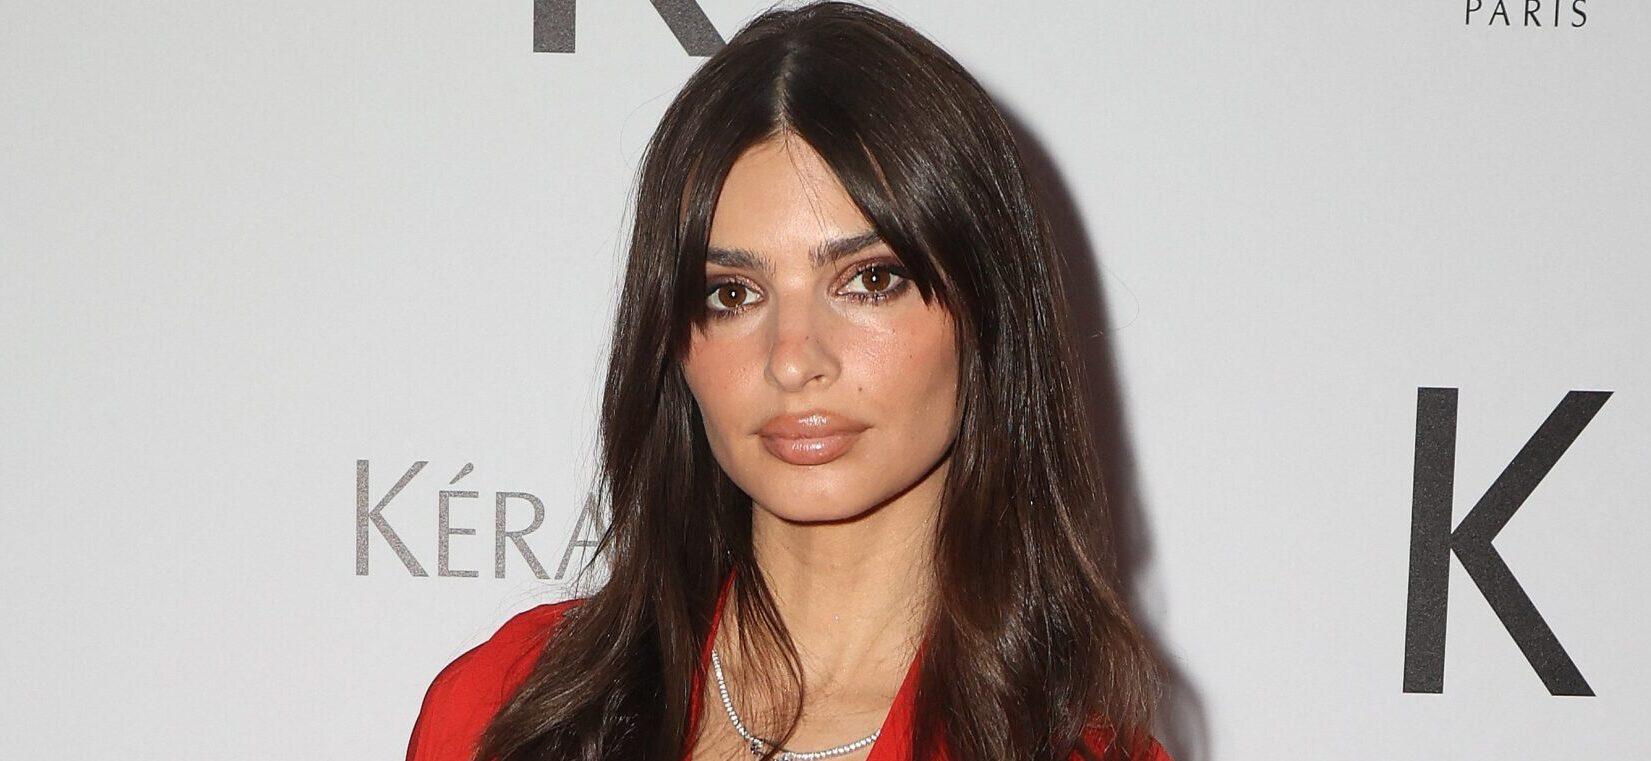 Emily Ratajkowski Almost Suffers A Wardrobe Malfunction In Her Sheer Cut-Out Top